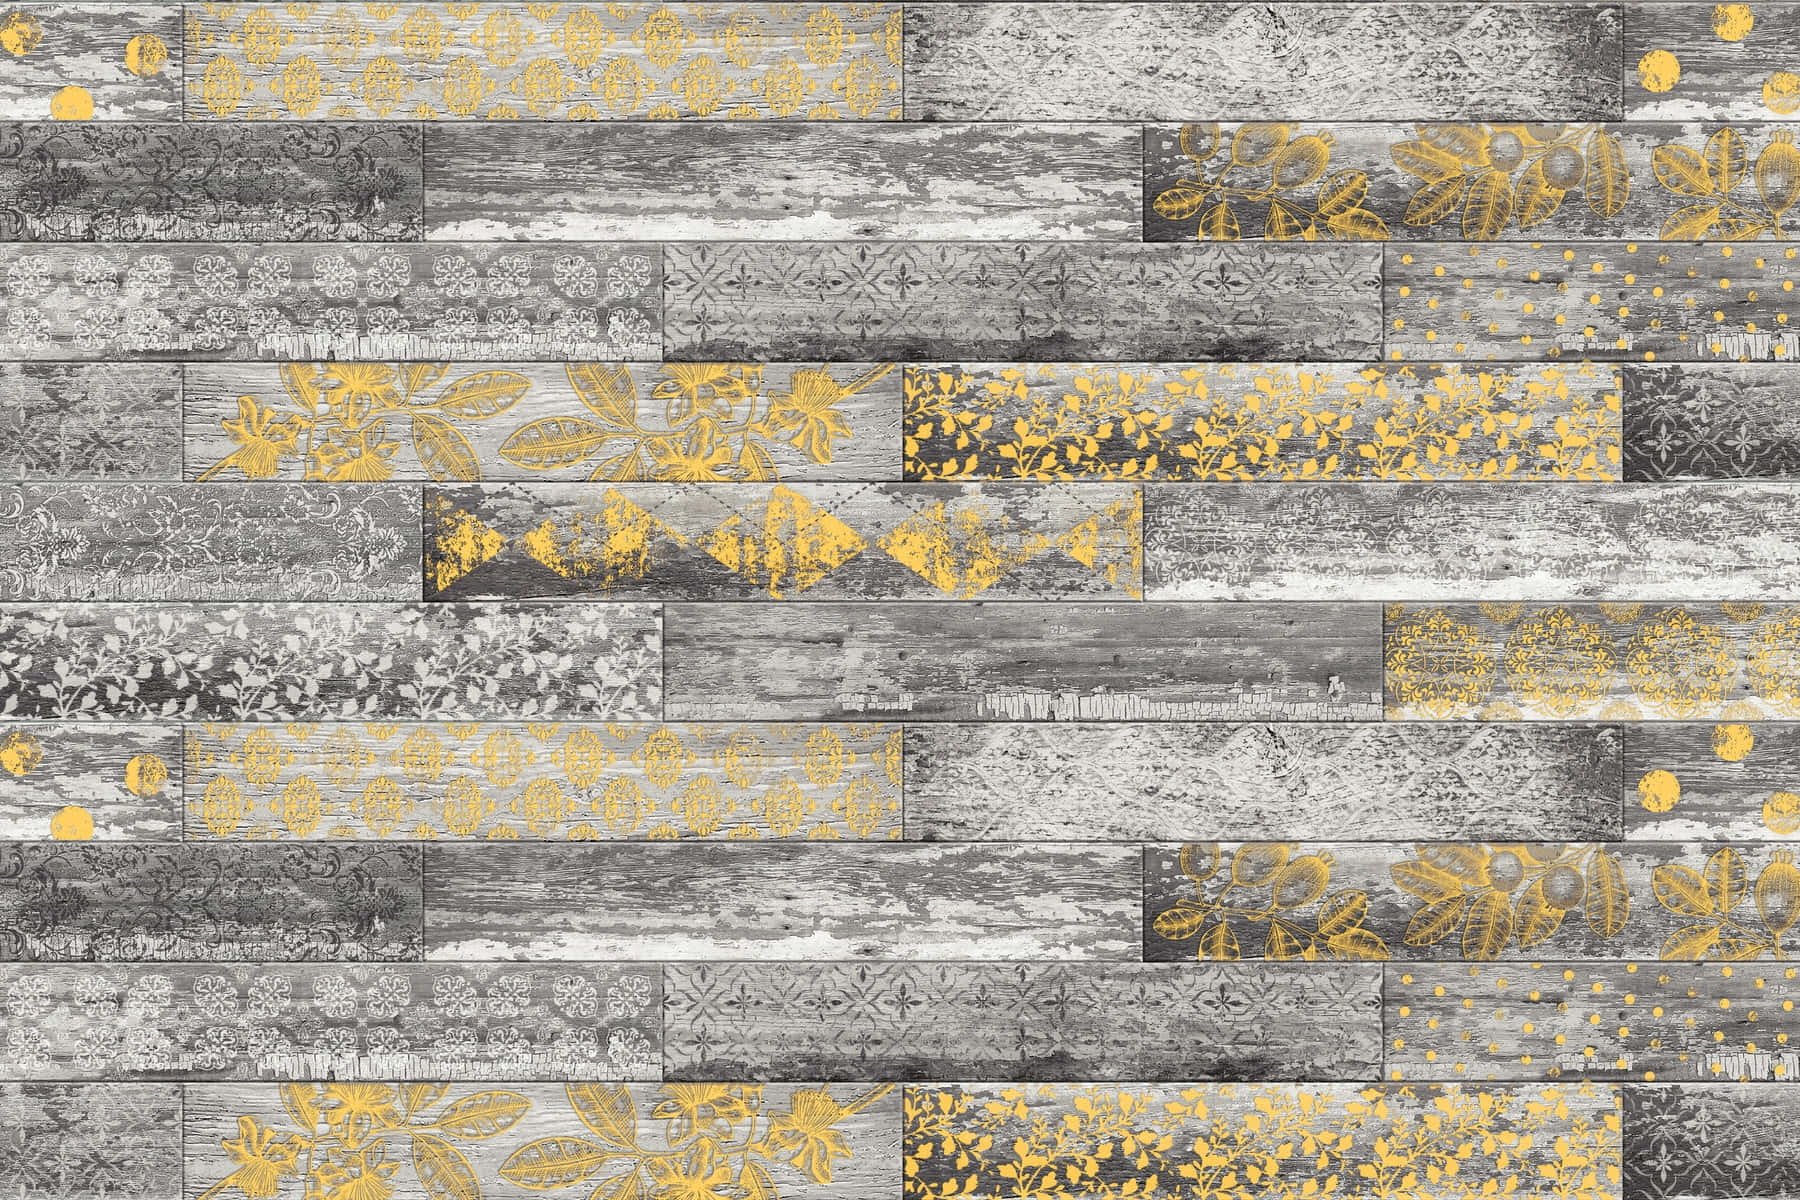 "Highlight Your Day with This Bright Gray and Yellow Wallpaper" Wallpaper